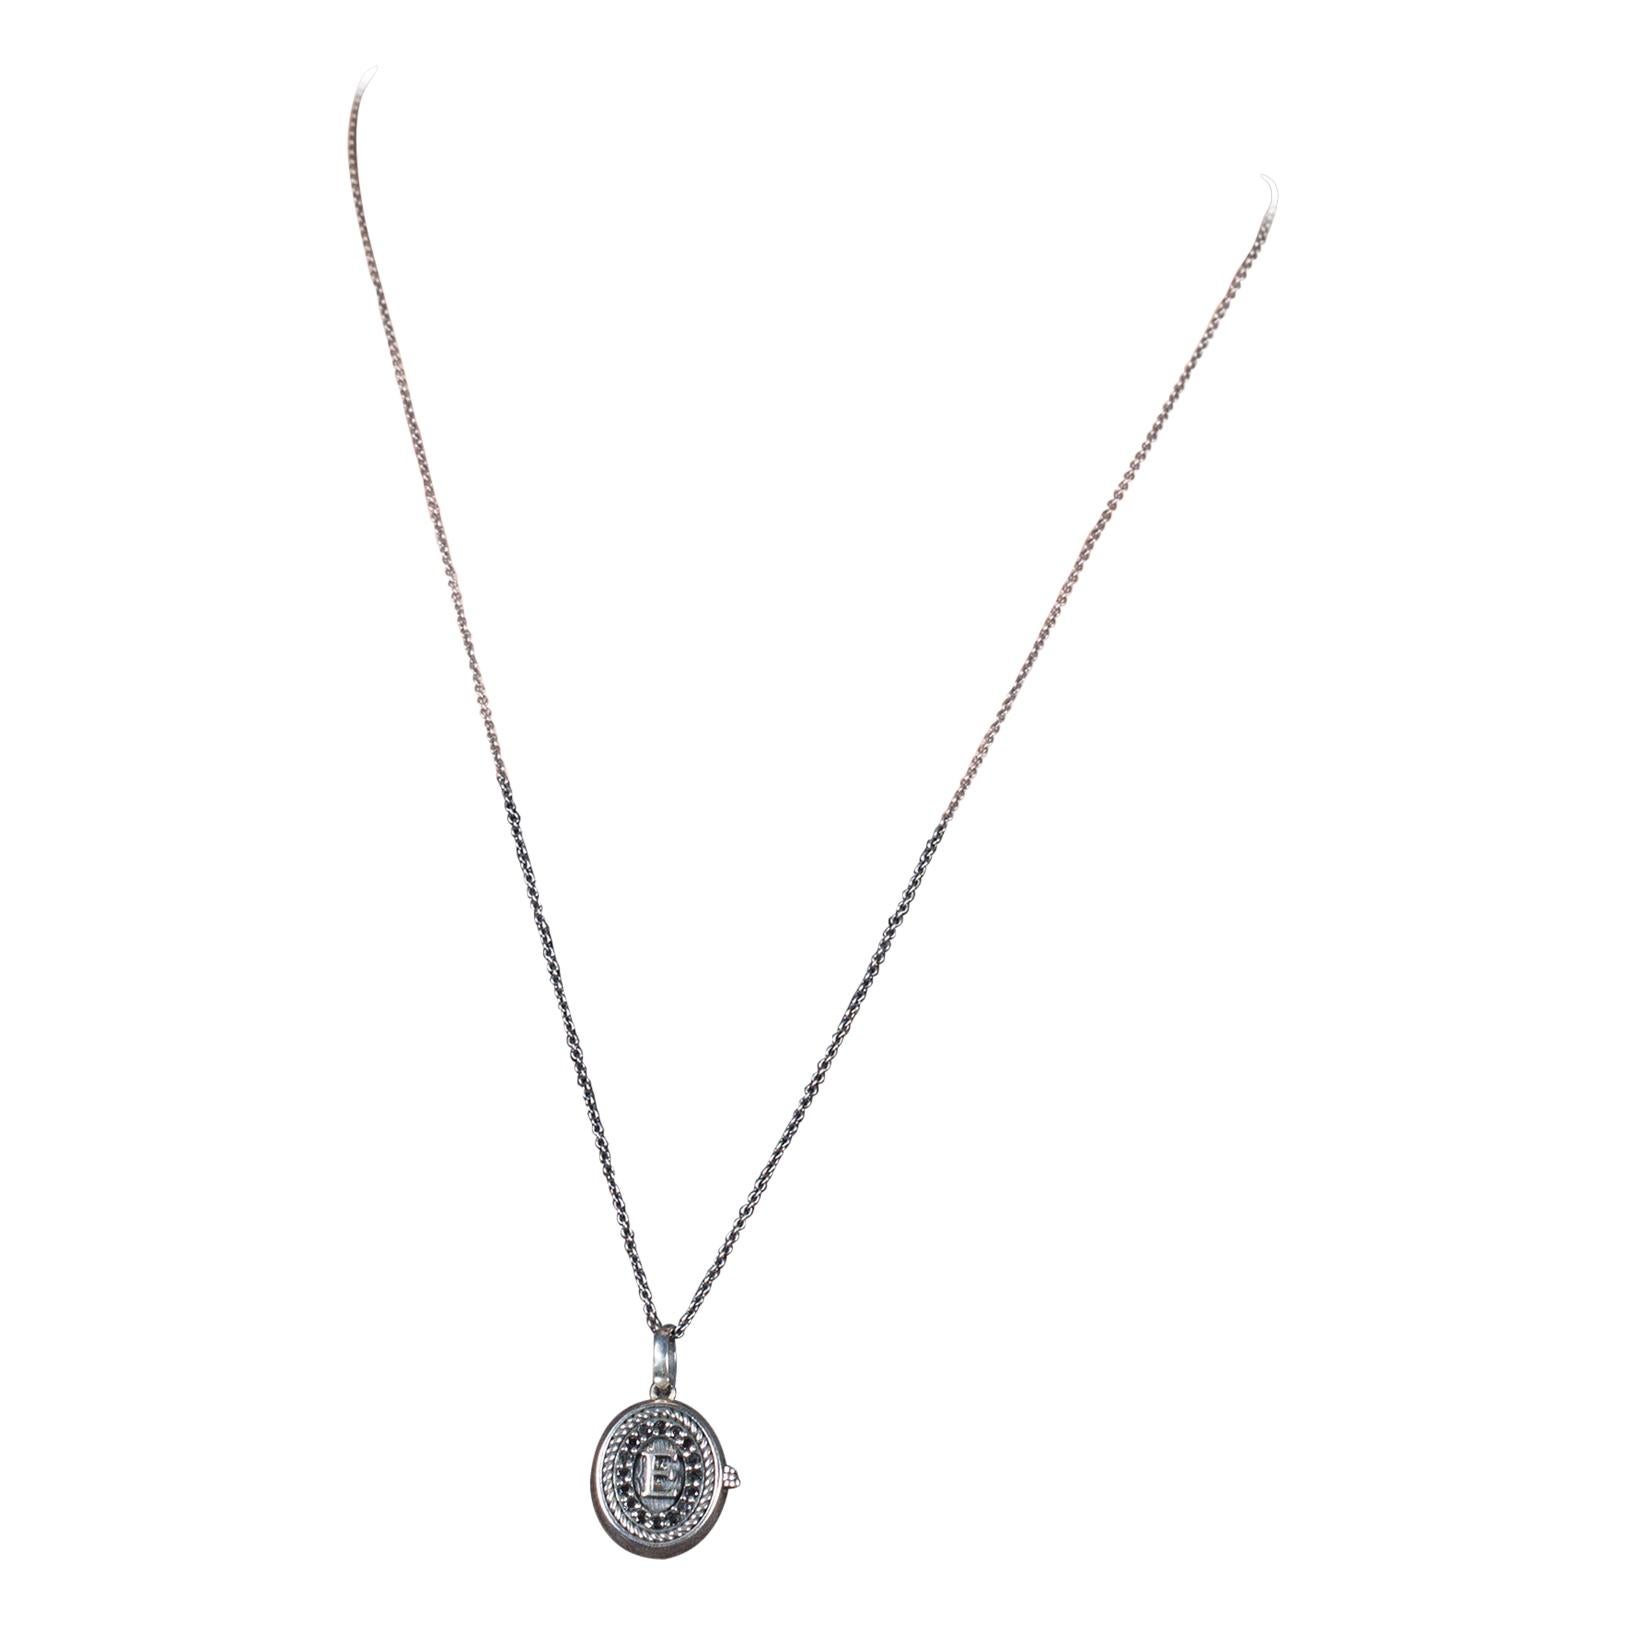 Contemporary Initials Locket Pendant Signet in Silver and Black Diamond Pavè from IOSSELLIANI For Sale